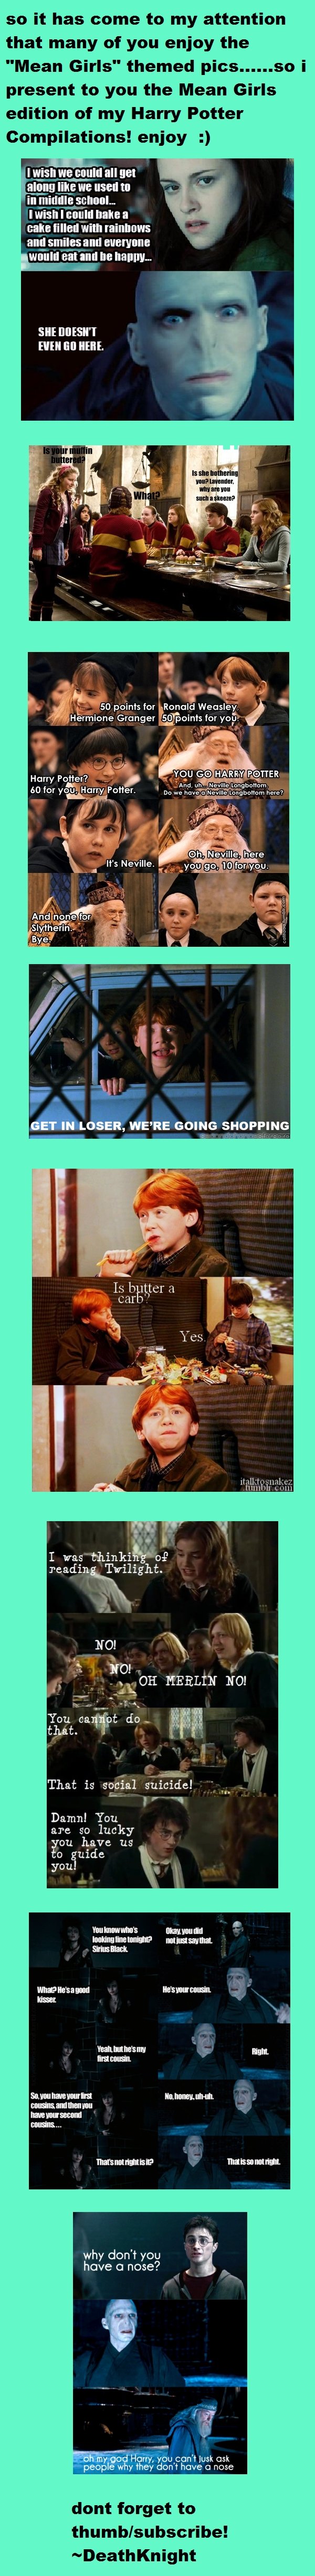 Harry Potter Compilation 6. compilation 7, my last compilation, IS UP!!!! &lt;a href=&quot;pictures/1330099/Harry+Potter+Compilation+7/&quot; target=blank&gt;fu